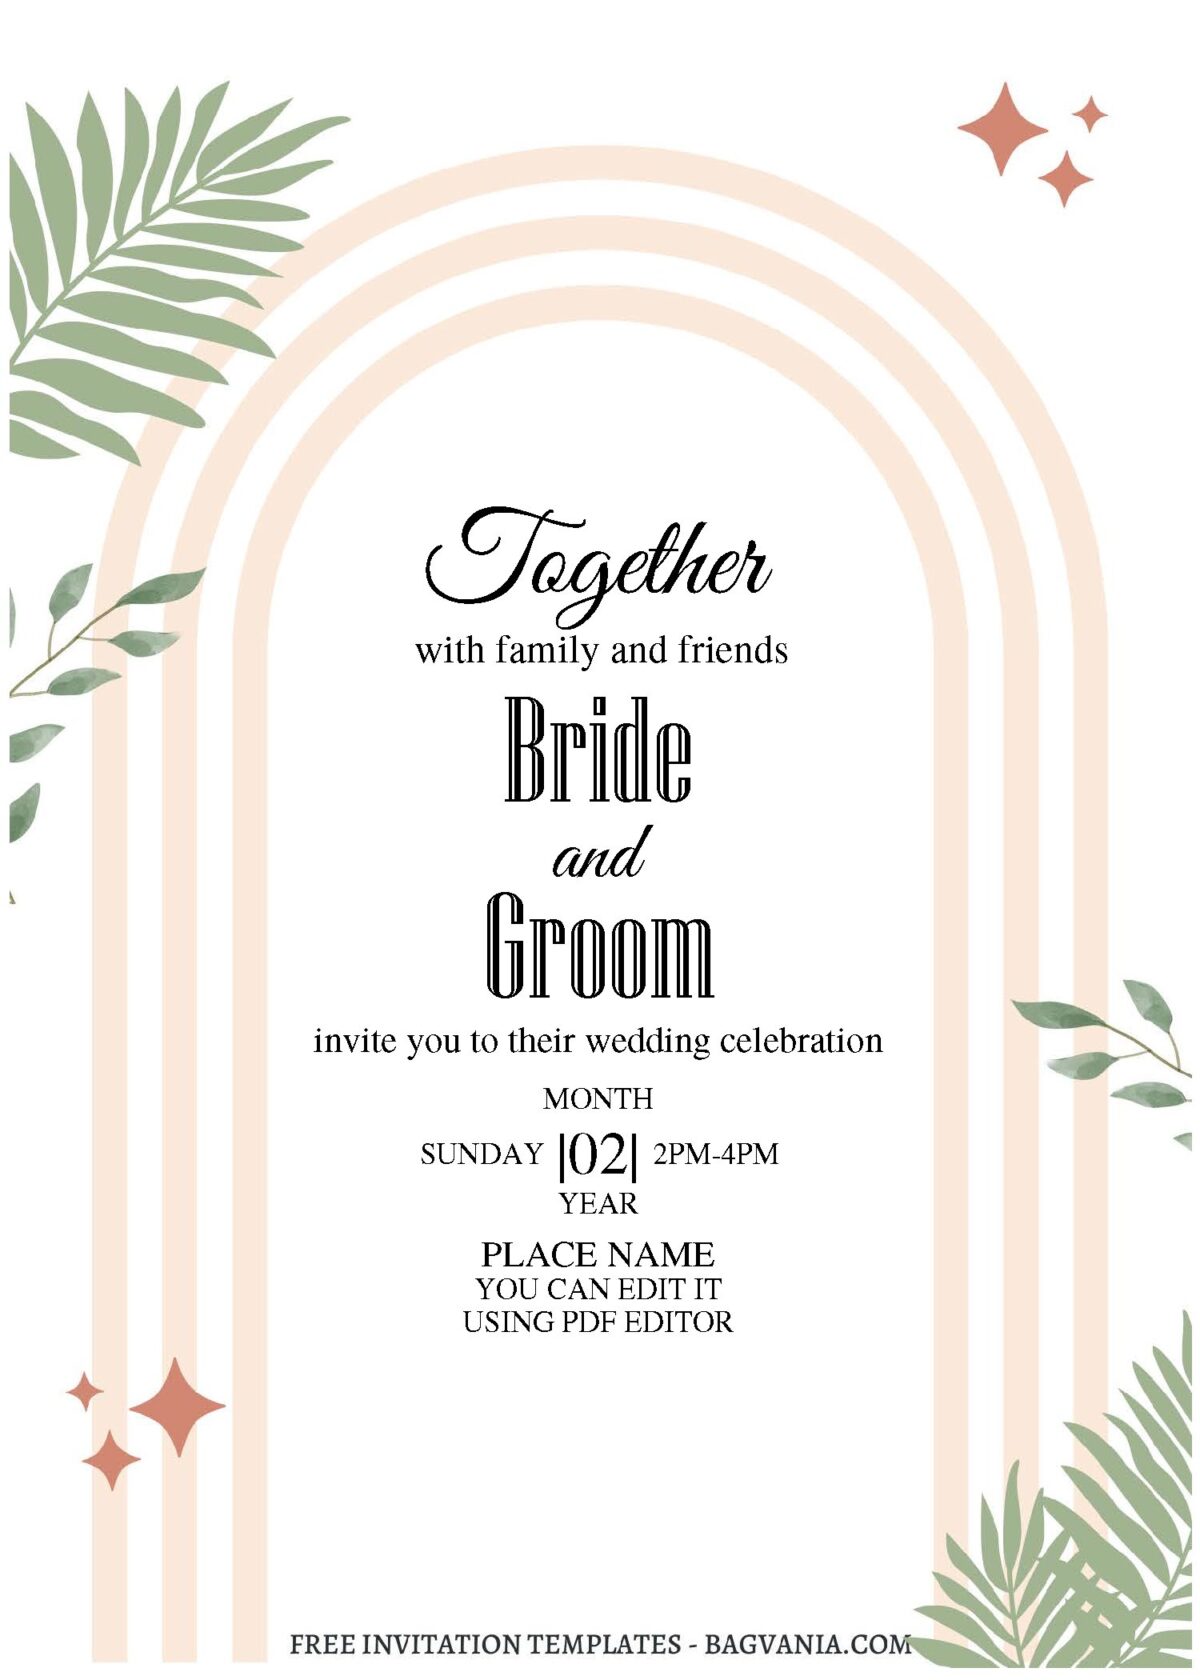 (Free Editable PDF) Boho Chic Wedding Invitation Templates with wooden arch text frame